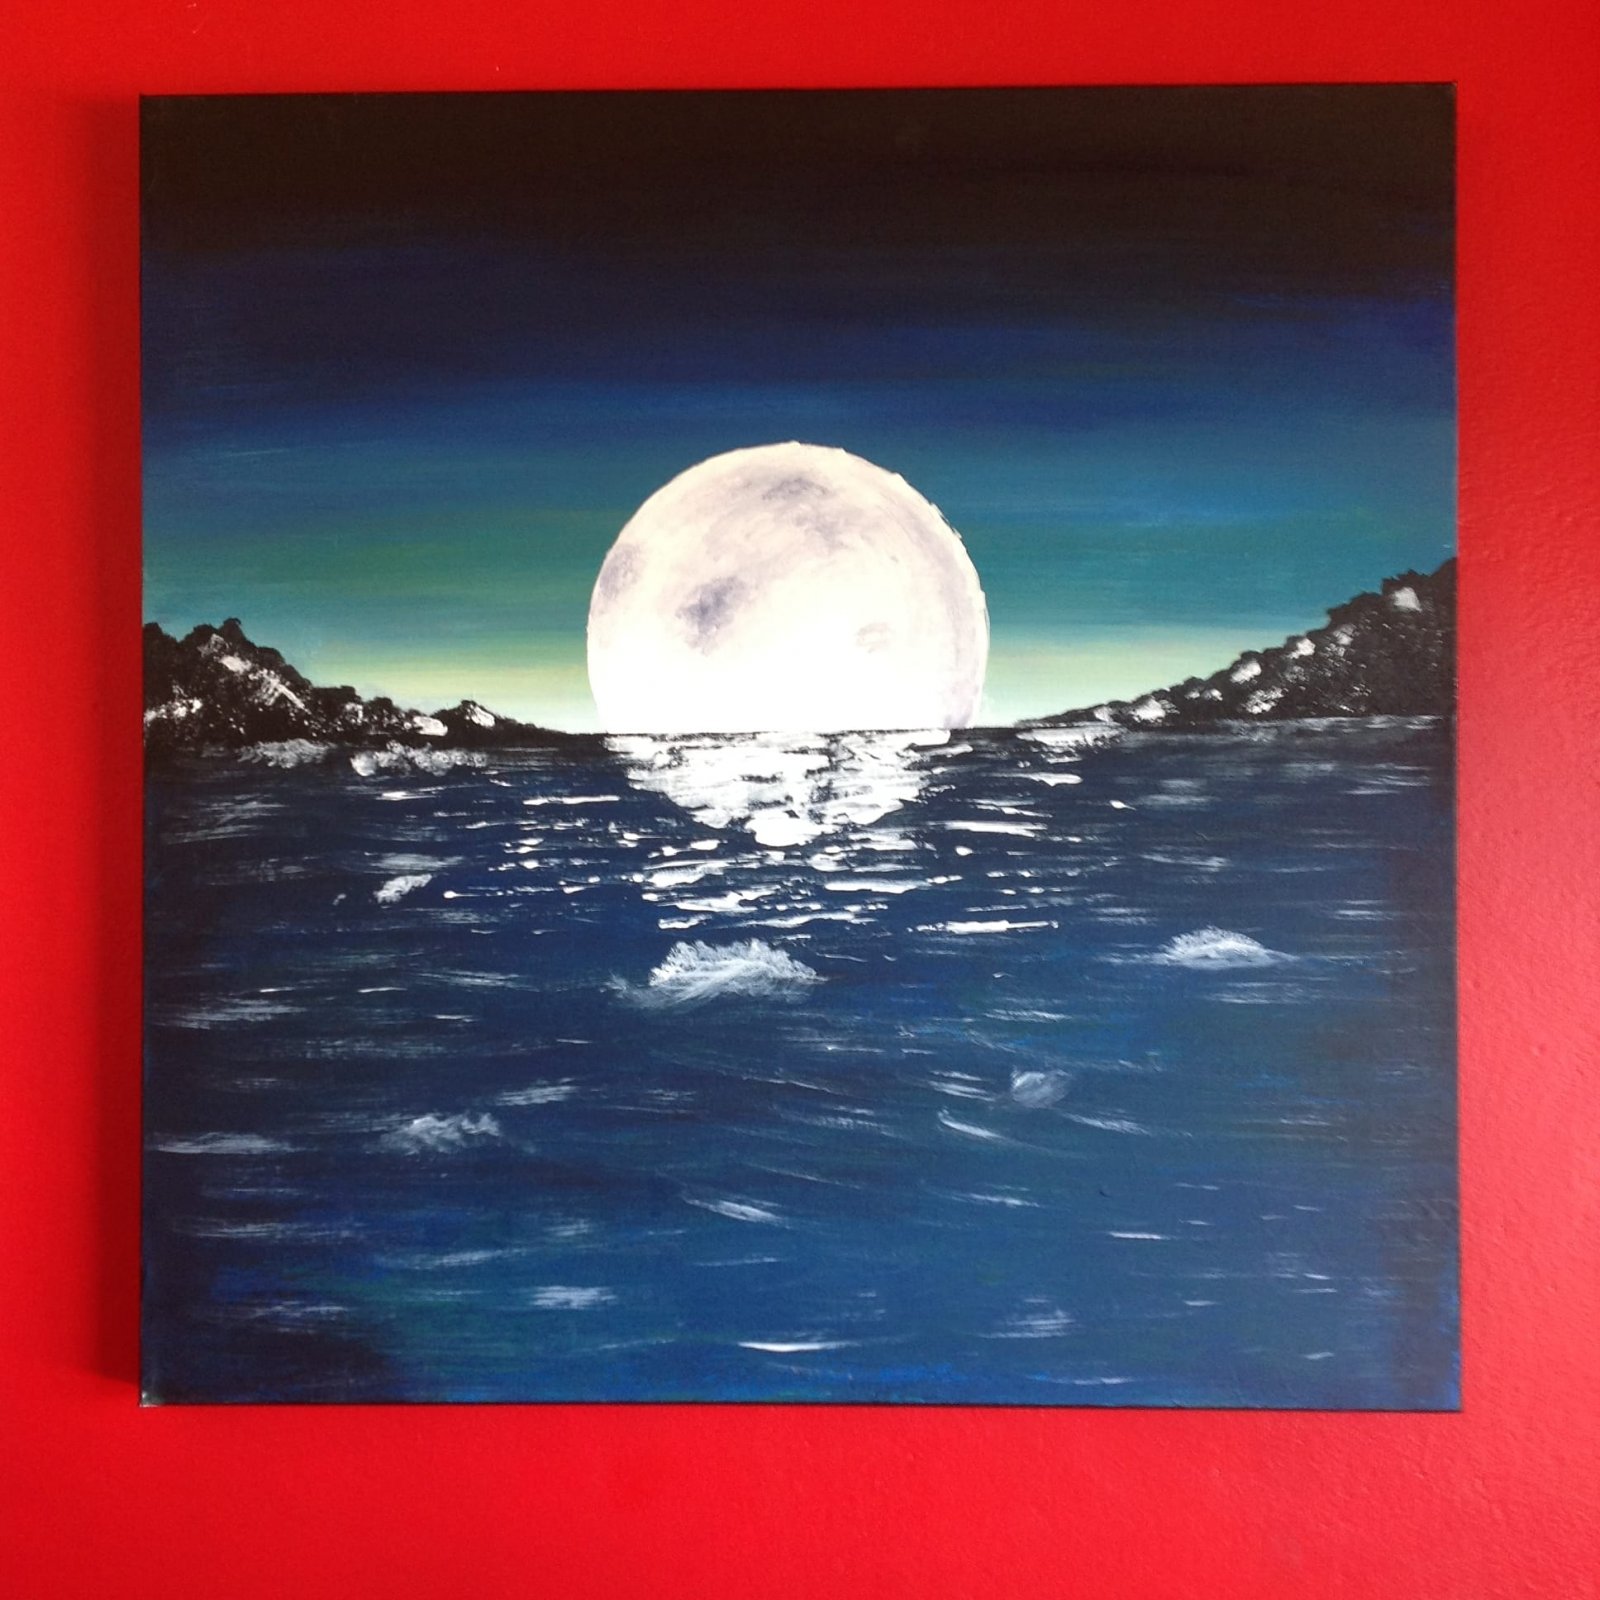 Wall canvas painting. Bidding starts at R3500 excluding courier/shipping.